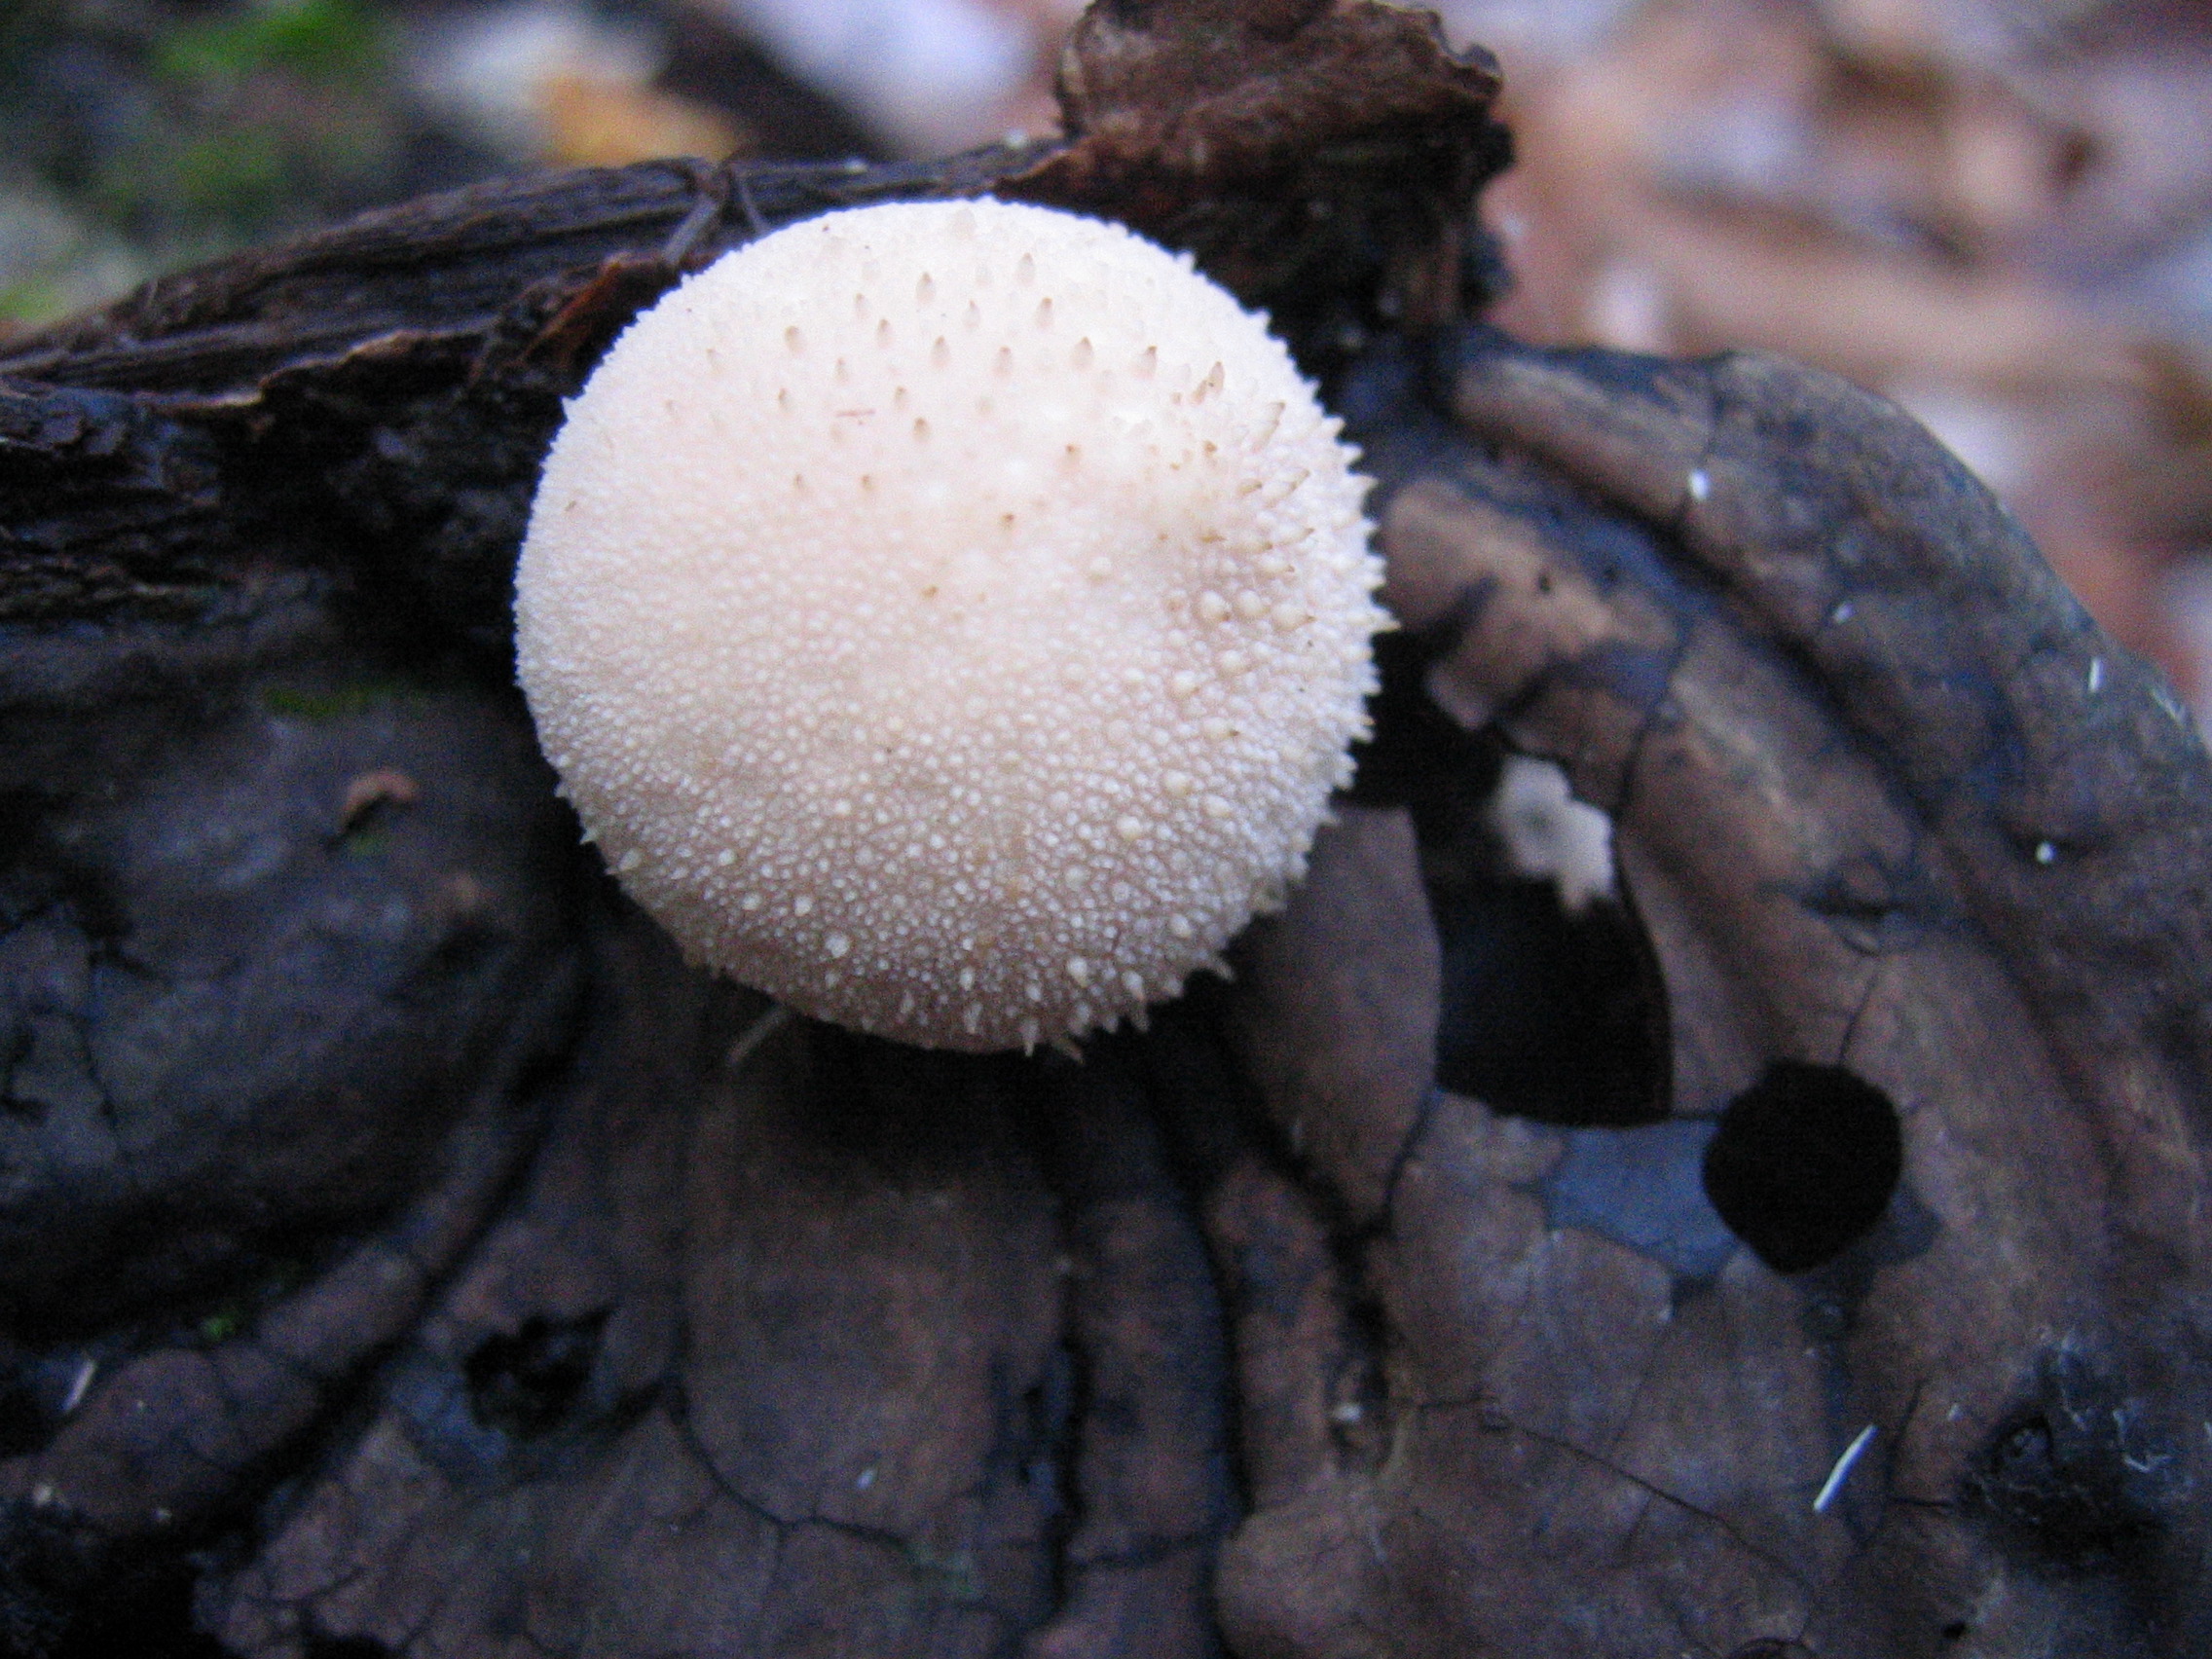 Gem-studded puffball growing on a rotting reishi